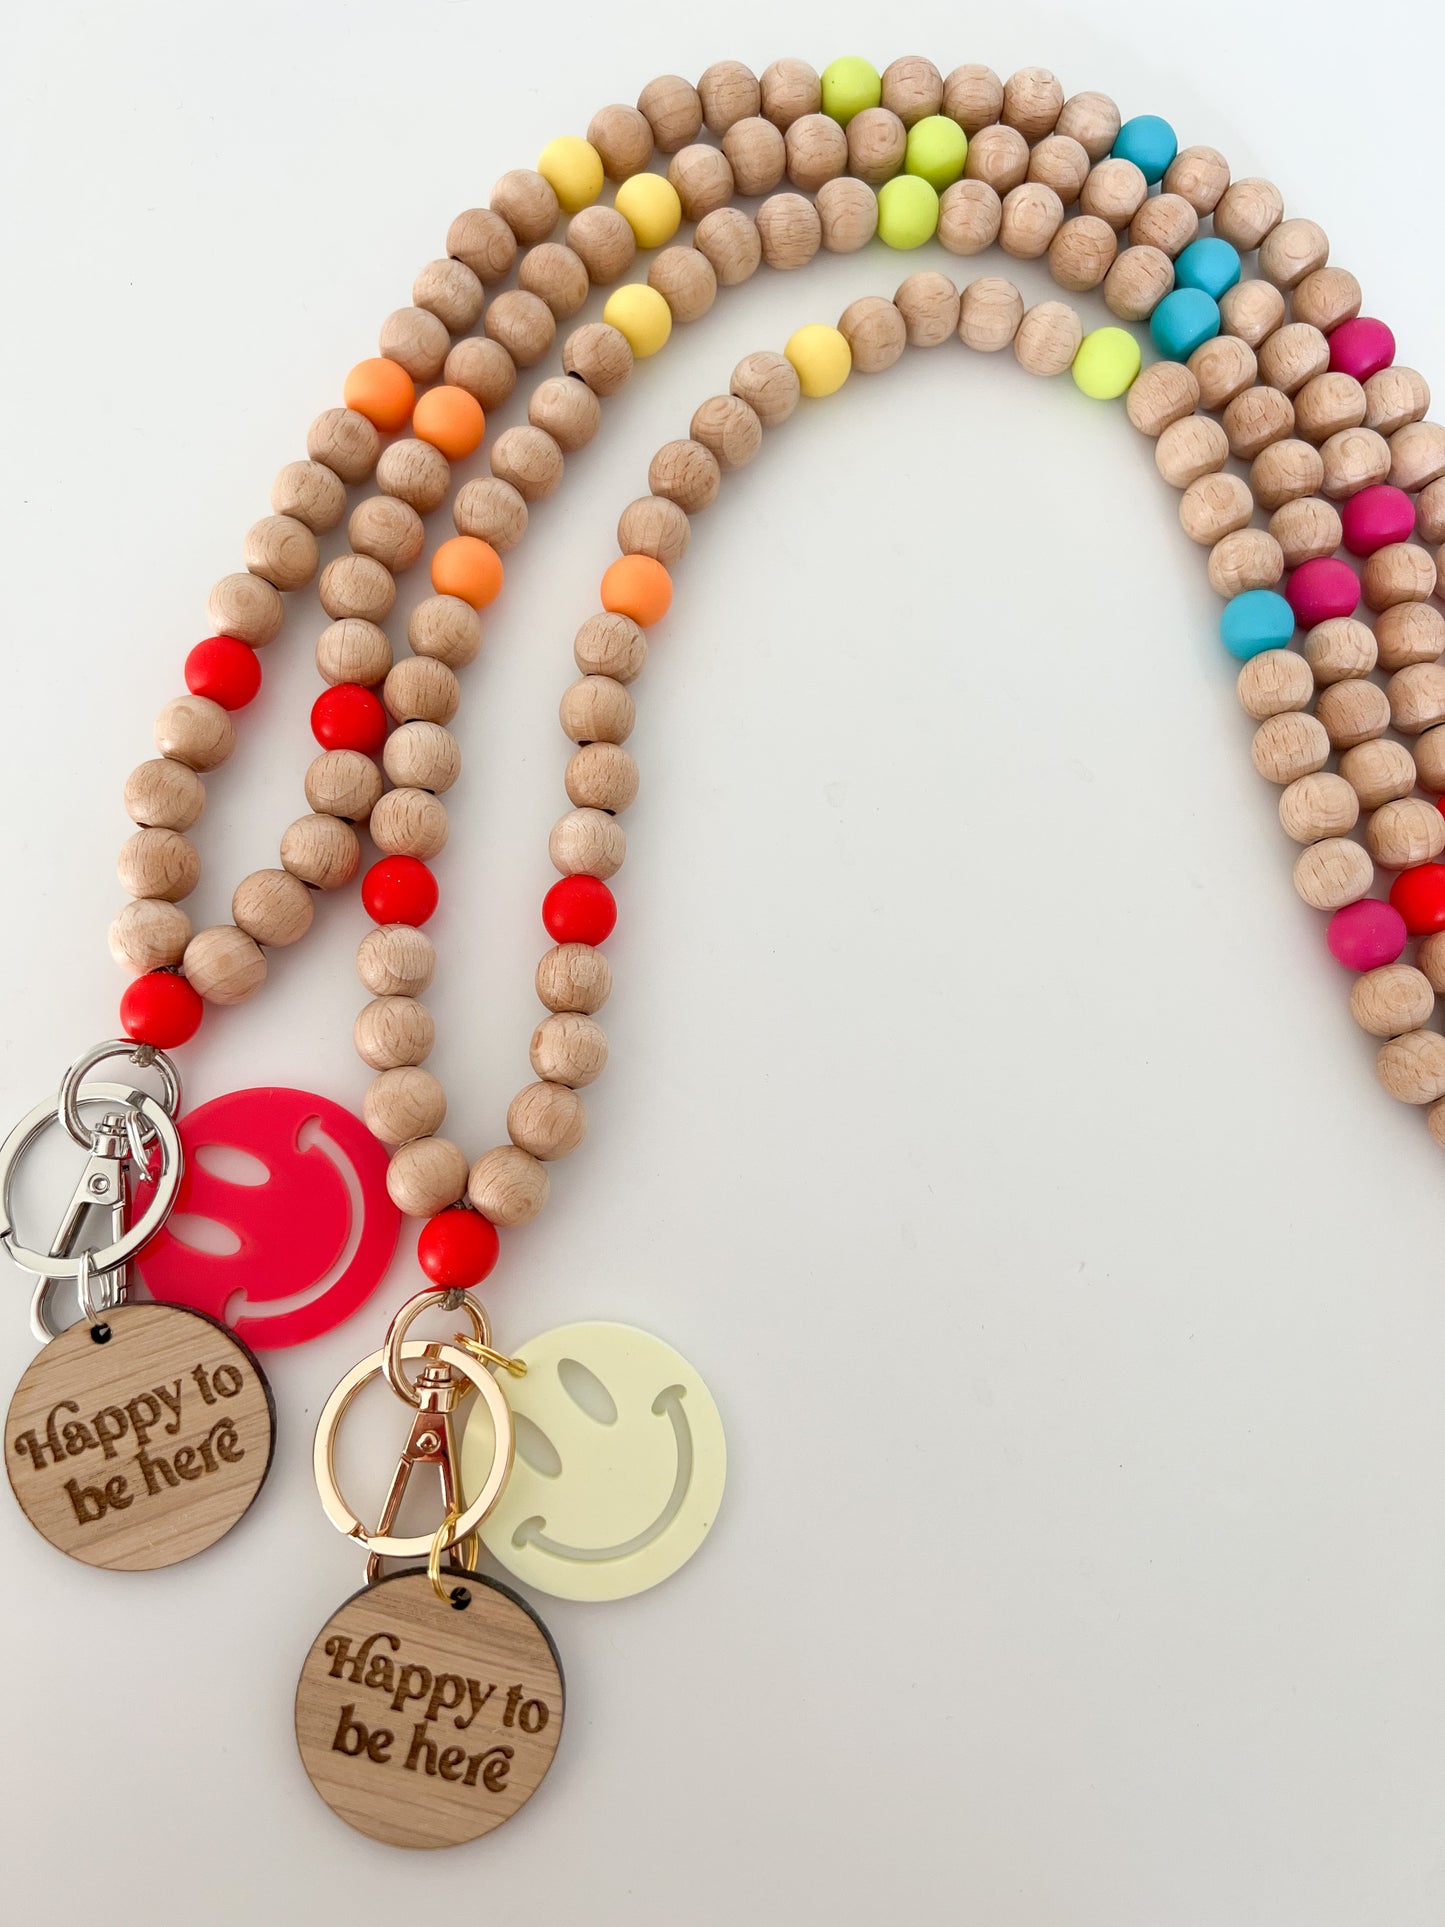 good life all beaded neon rainbow lanyard (includes smiley & happy to be here charms)